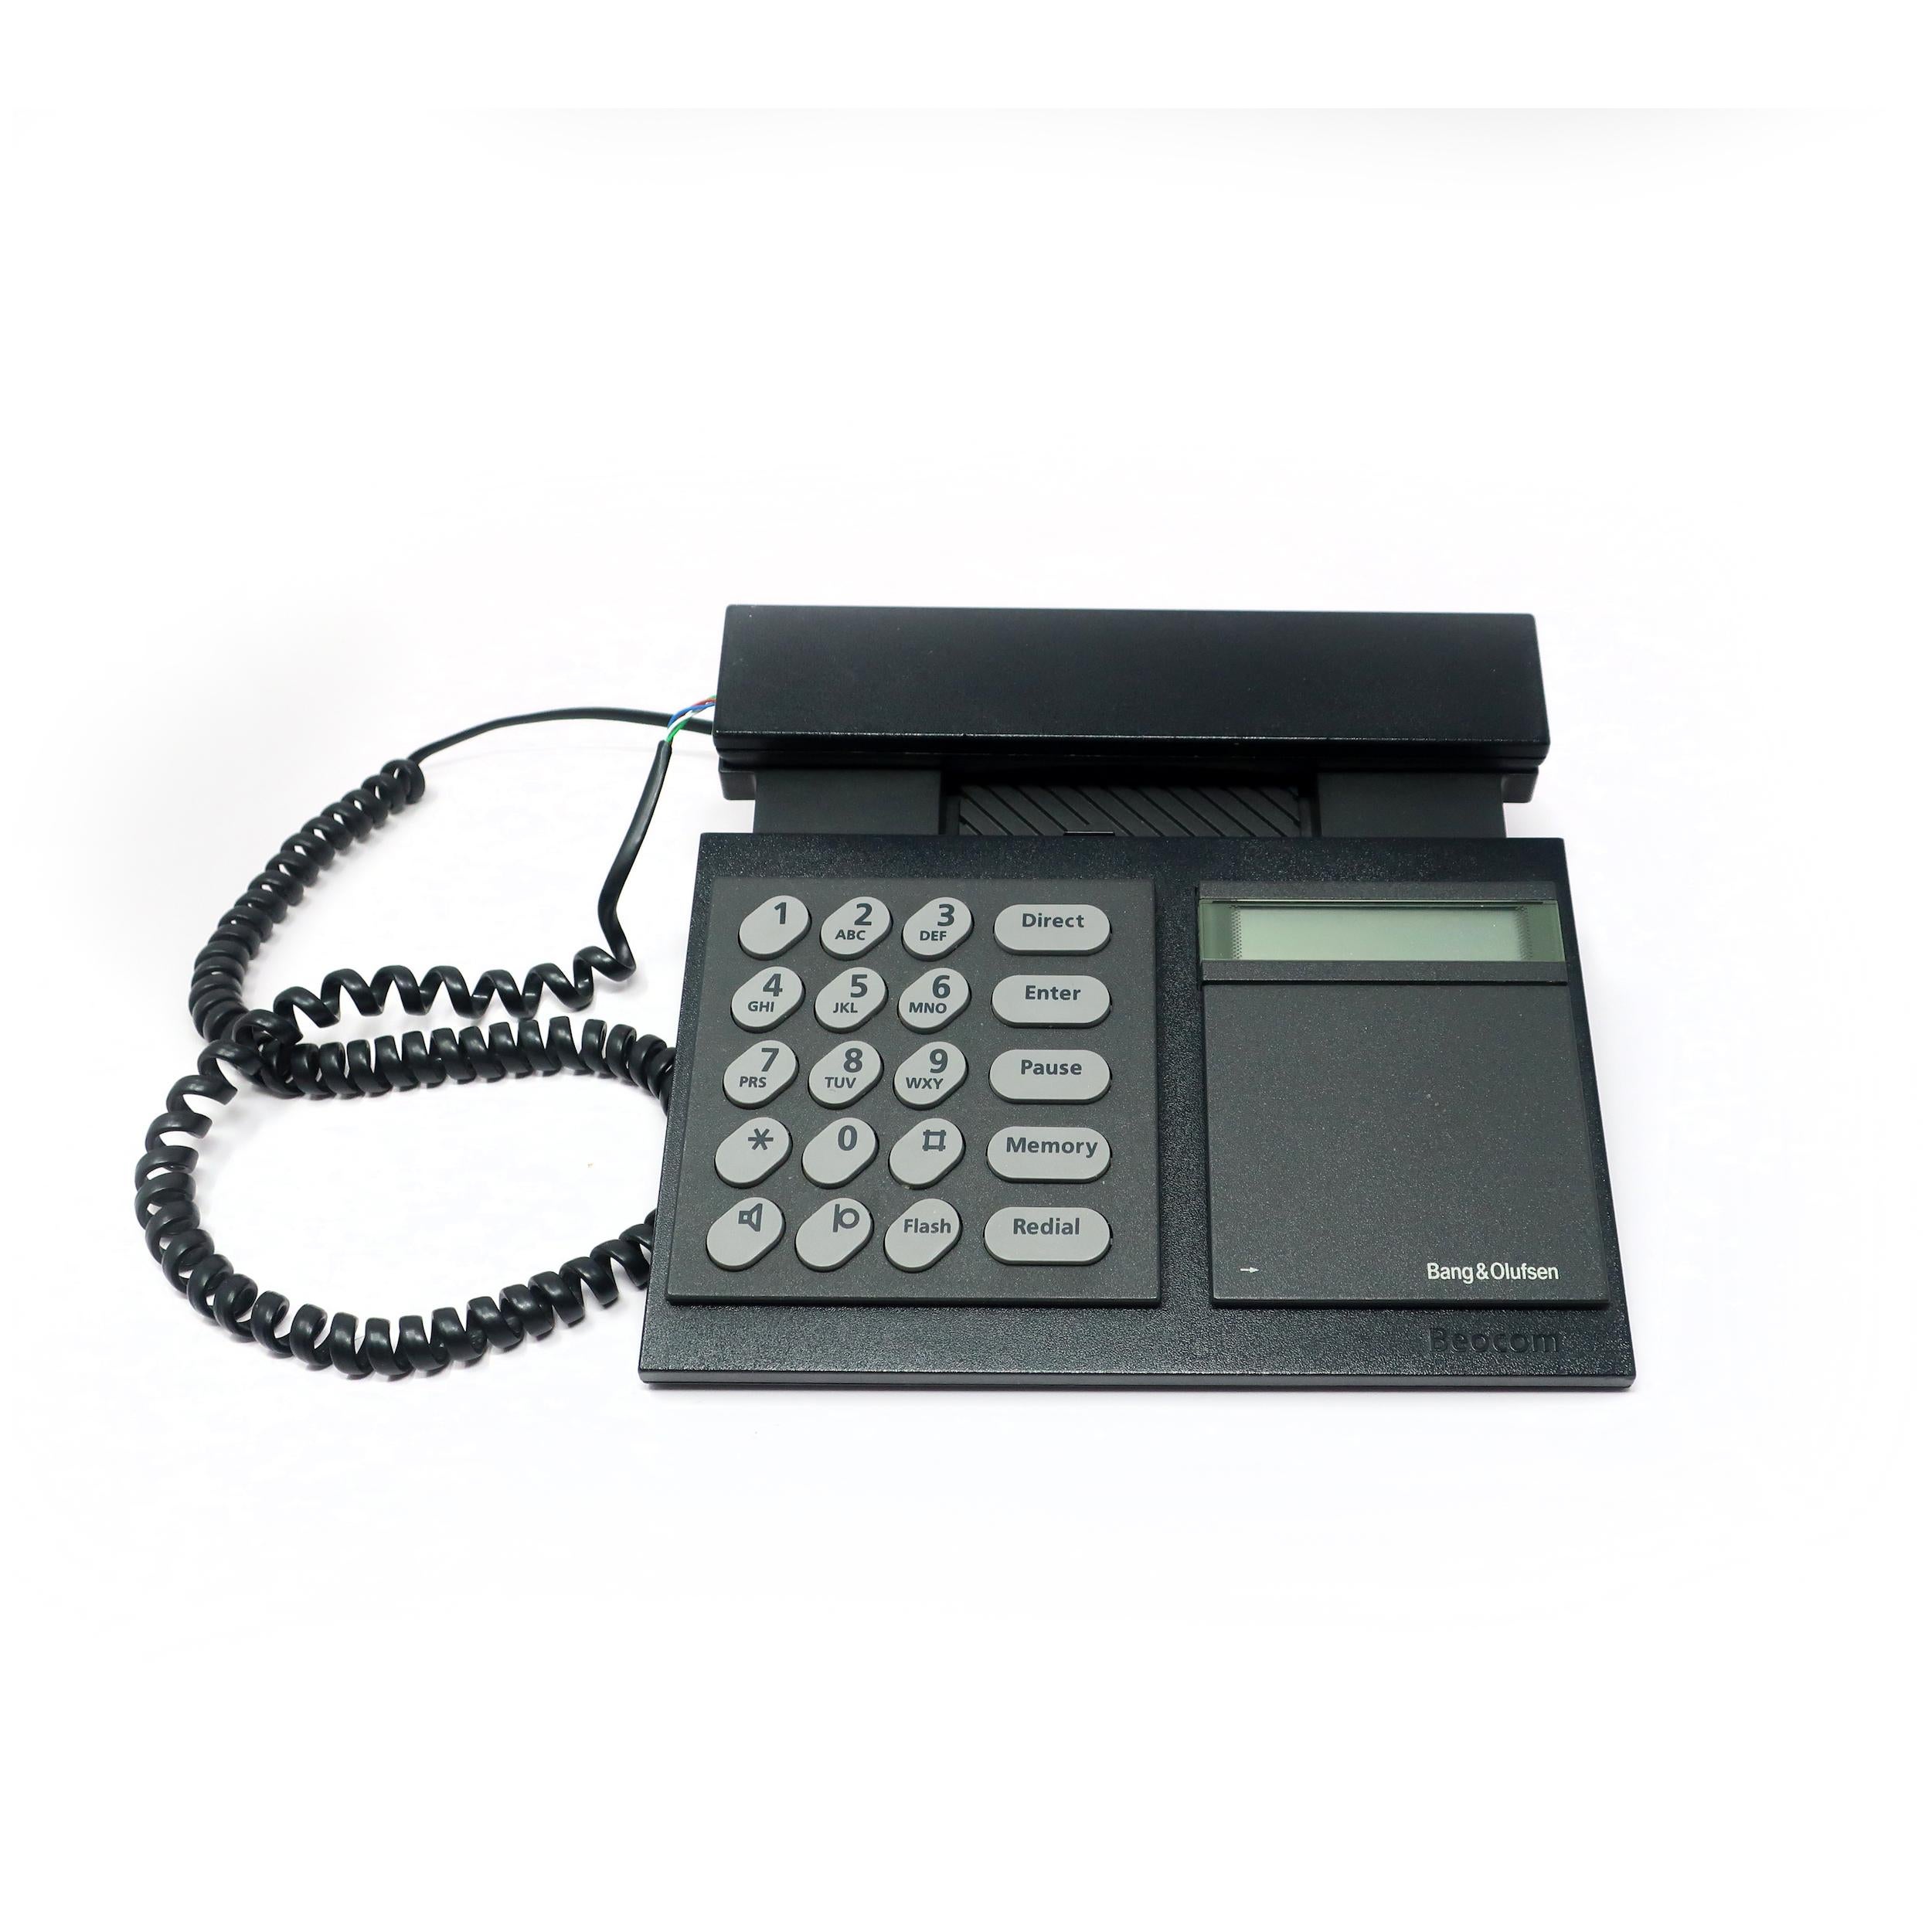 Designed in 1986 by Lone and Gideon Lindinger-Lowy, the Bang & Olufsen Beocom 2000 telephone is Danish design at its finest, and the epitome of 1980s high-tech and high design. It has a black handset and base with multicolored buttons. 

In